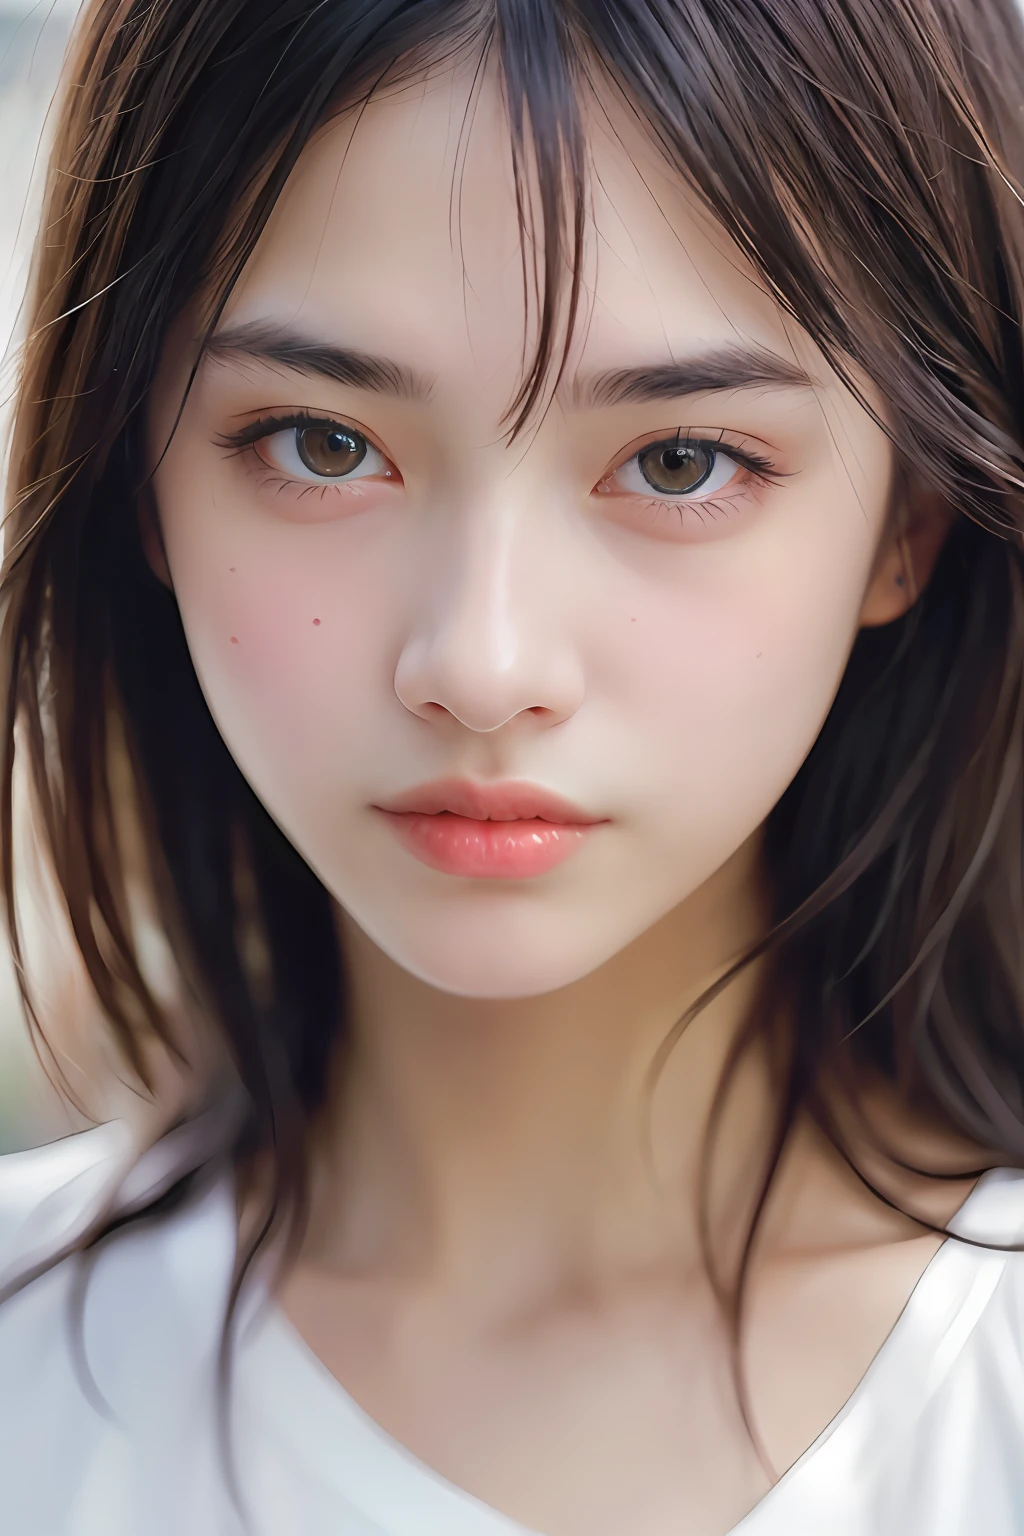 clothed、(photoRealstic:1.4)、(hiper realistic:1.4)、(Realistic:1.3)、(Smooth lighting:1.05)、(Improved cinematic lighting quality:0.9)、32K、1girl in、30-year-old girl、Typical Japan human face、Realistic lighting、back lighting、Facial Lights、Ray tracing、(brightened light:1.2)、(Quality improvement:1.4)、(Realistic textured skin of the highest quality:1.4)、fine detailed eyes、detailed faces、Fine quality eye、(Tired, sleepy and satisfied: 0.0)、Face close-up、tshirts、(Enhances the atmosphere of the body line:1.1)、(Increase the beauty of skin texture:1.1)